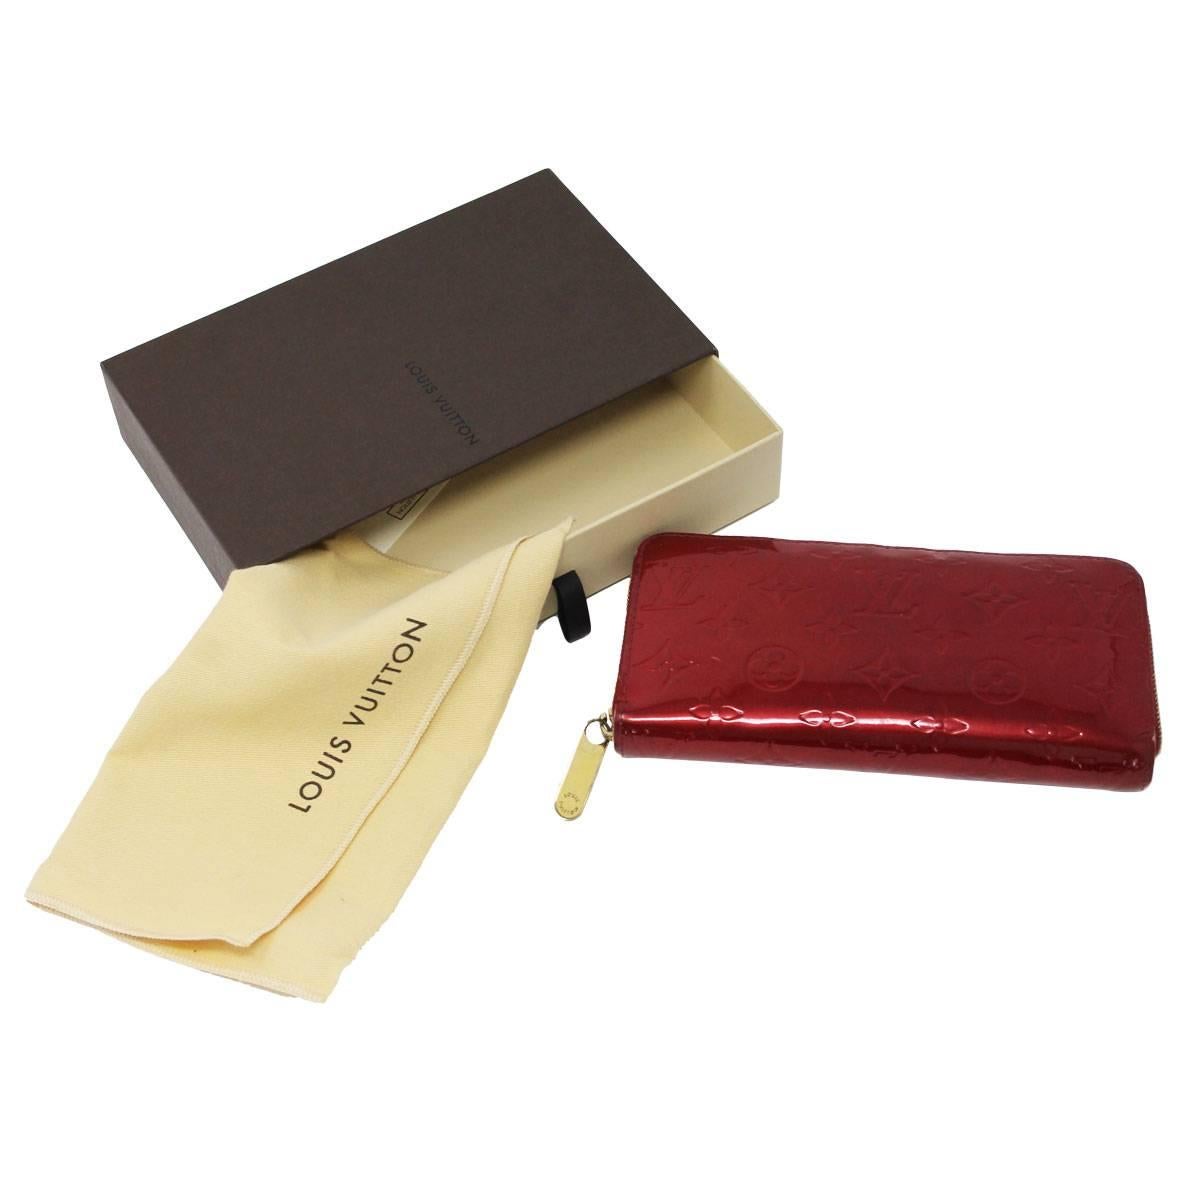 Louis Vuitton Zippy Wallet Red Vernis Leather in Box 4